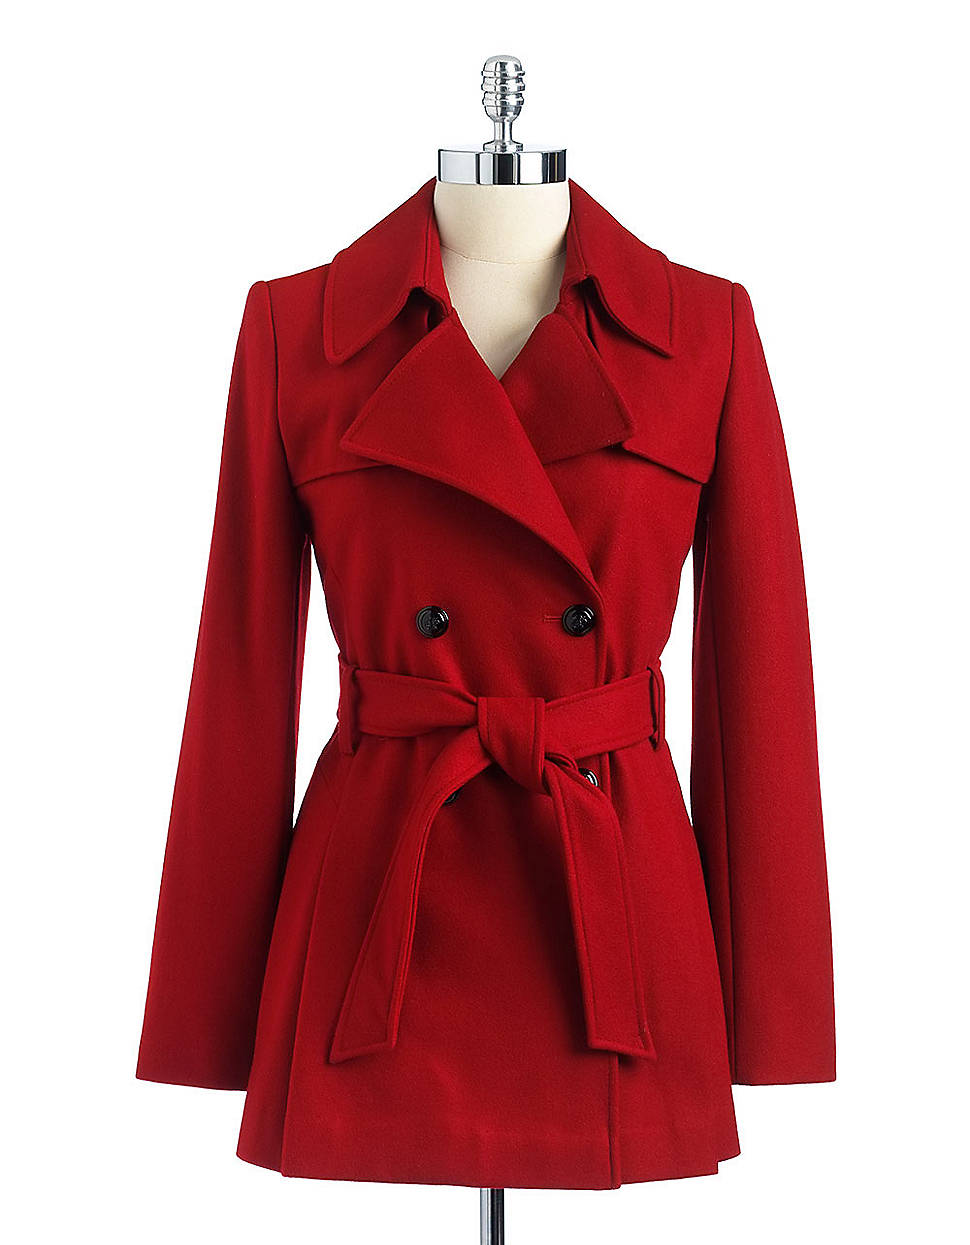 Lyst - Via Spiga Petites Double Breasted Cropped Trench Coat in Red